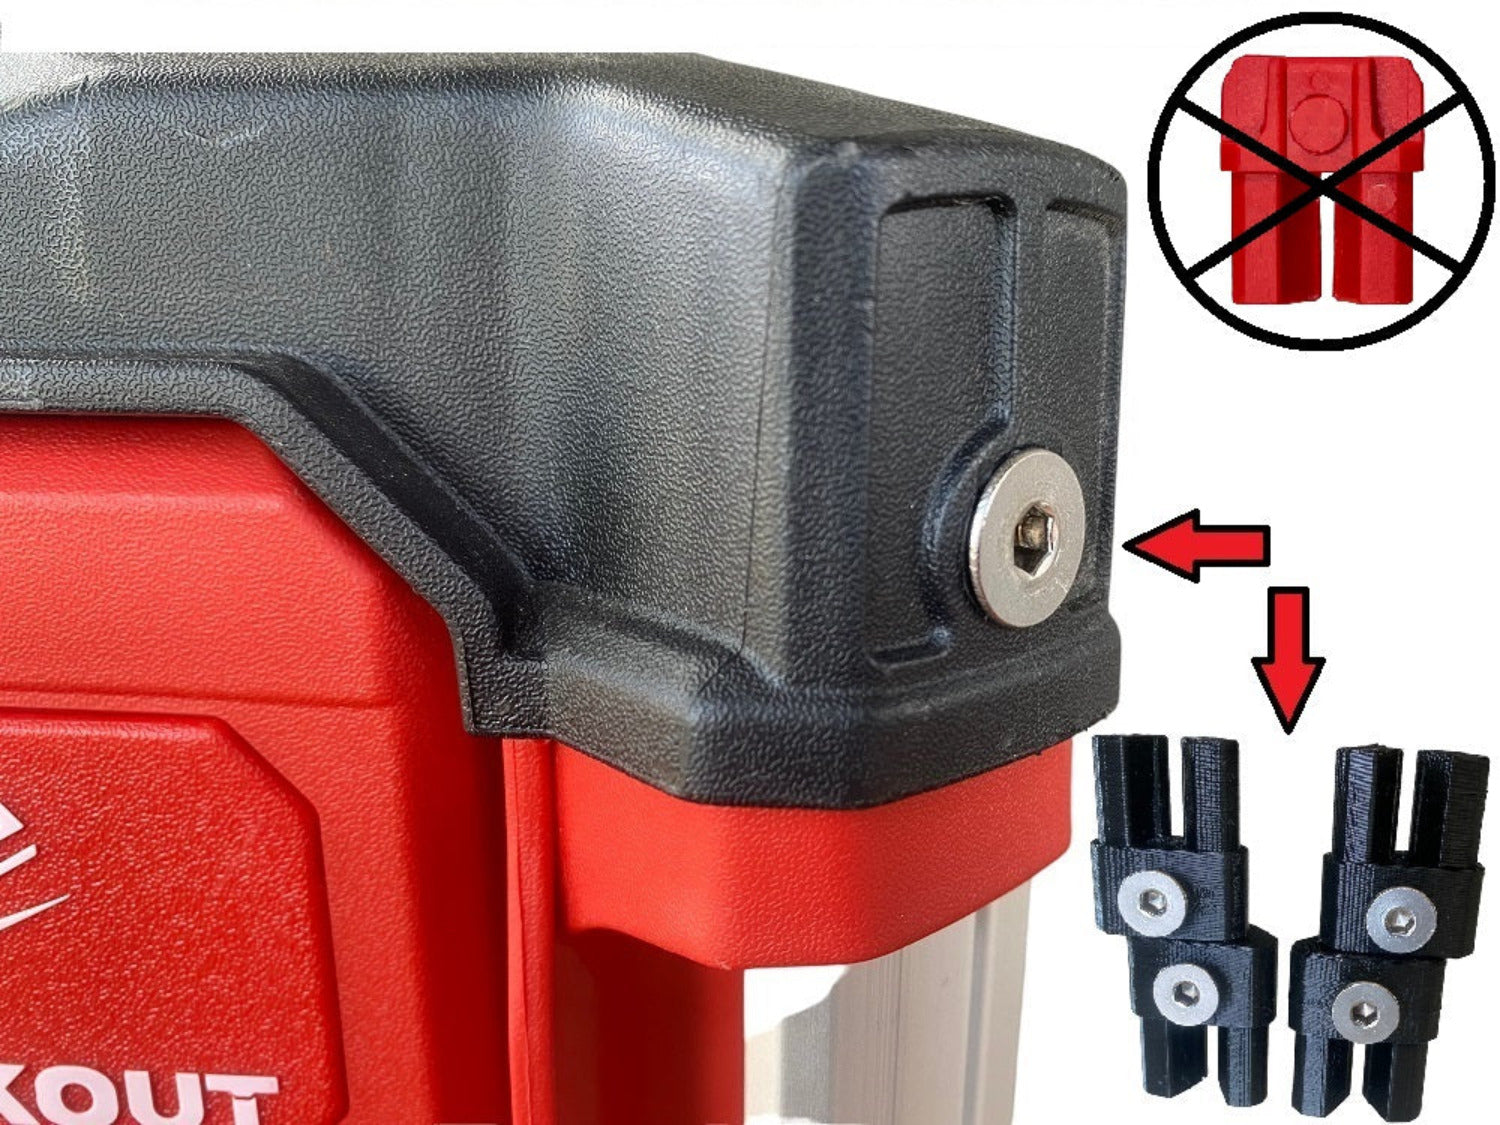 Rail Cap's for Milwaukee 2 & 3 Drawer Packouts